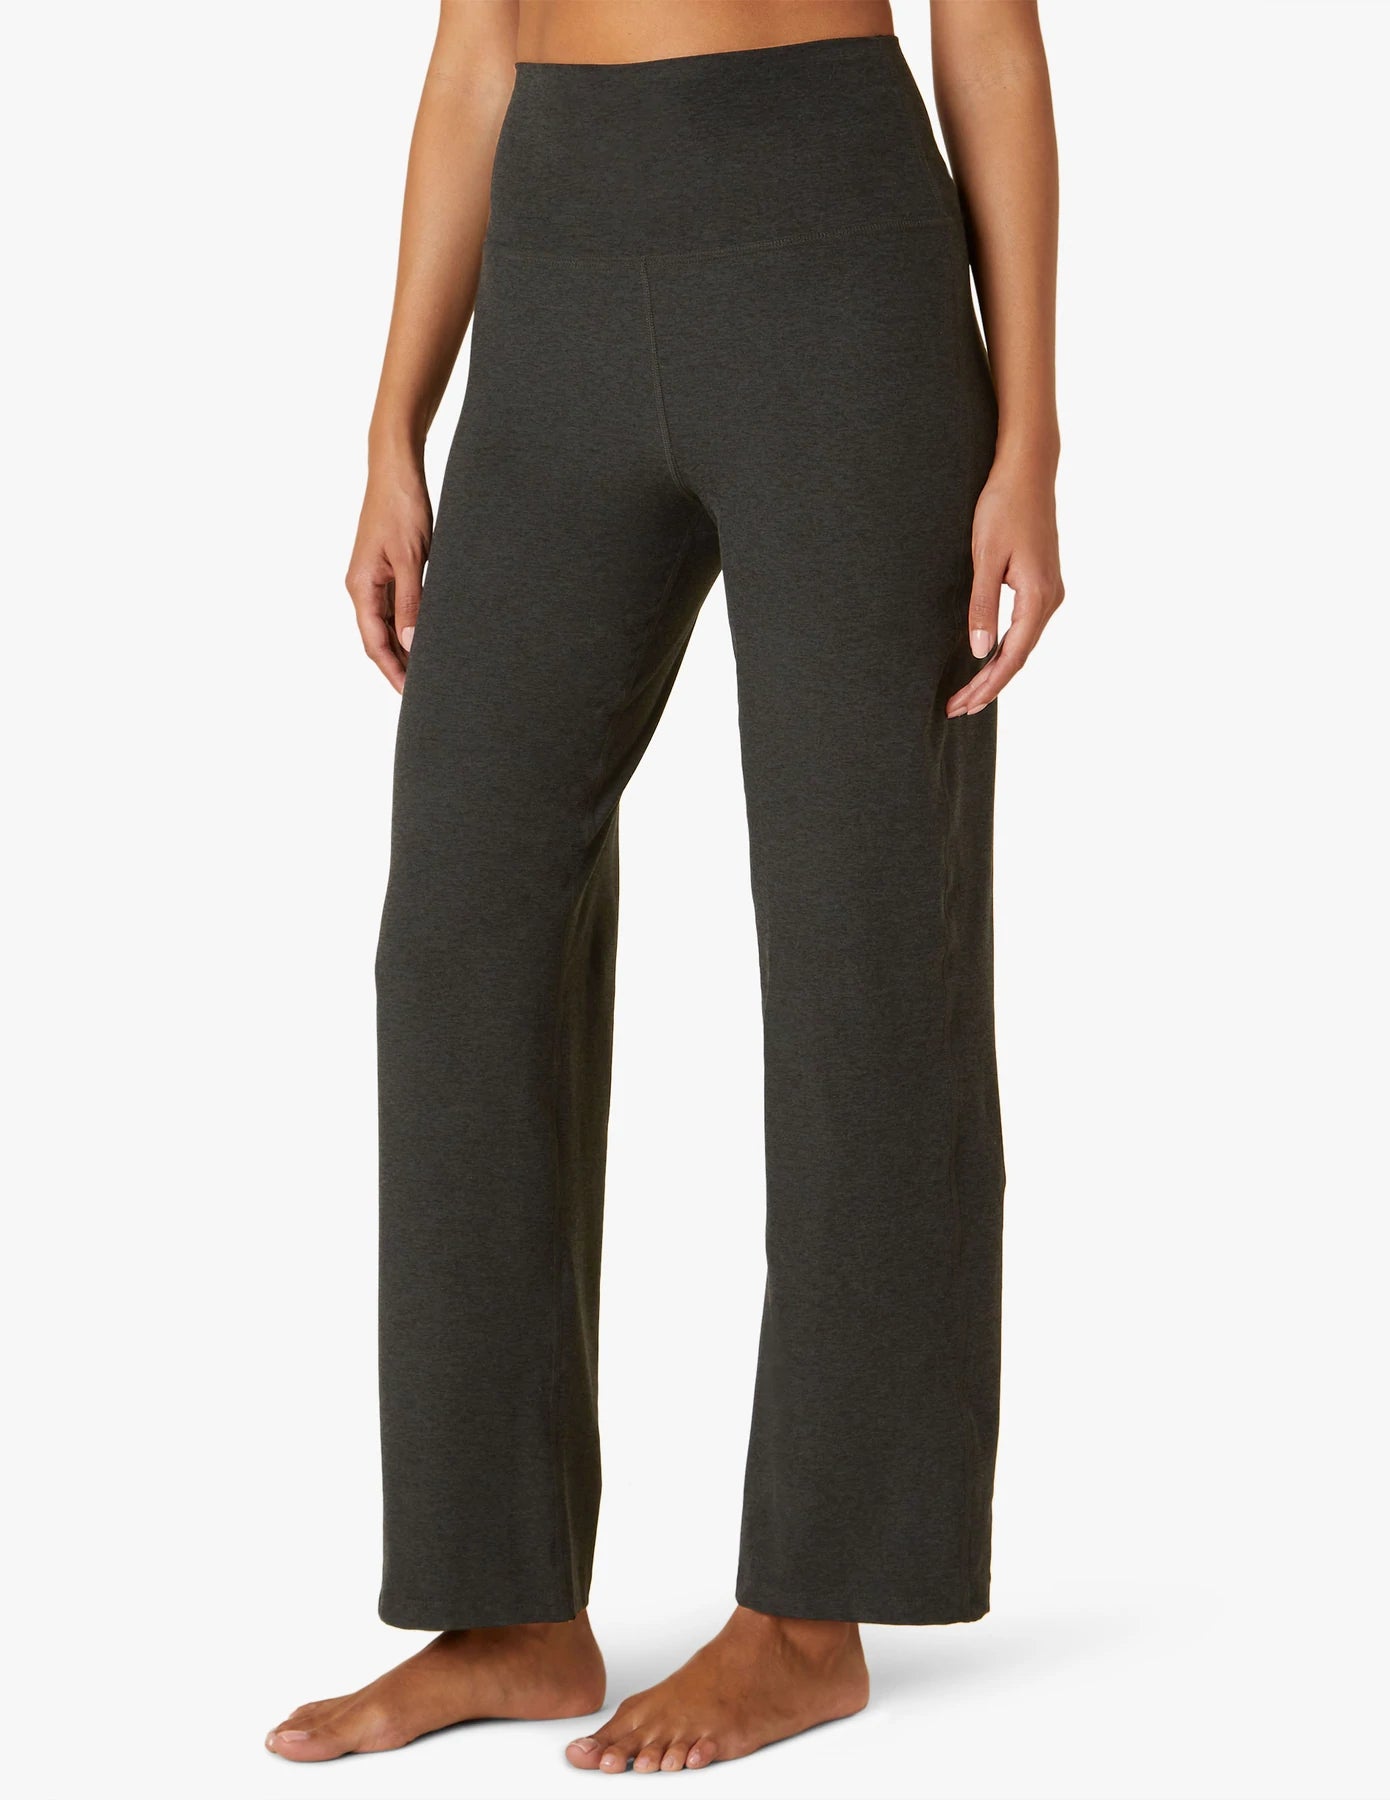 There's no limits to where the Limitless High Waisted Straight Leg Pants can go: the office, the gym, and even out to dinner. Classic straight leg design gives a timeless style sense, while all over softness and breathability make these pants a closet essential. Beyond Yoga's bestselling high waist band ensures they compliment your shape as much as they comfort you.